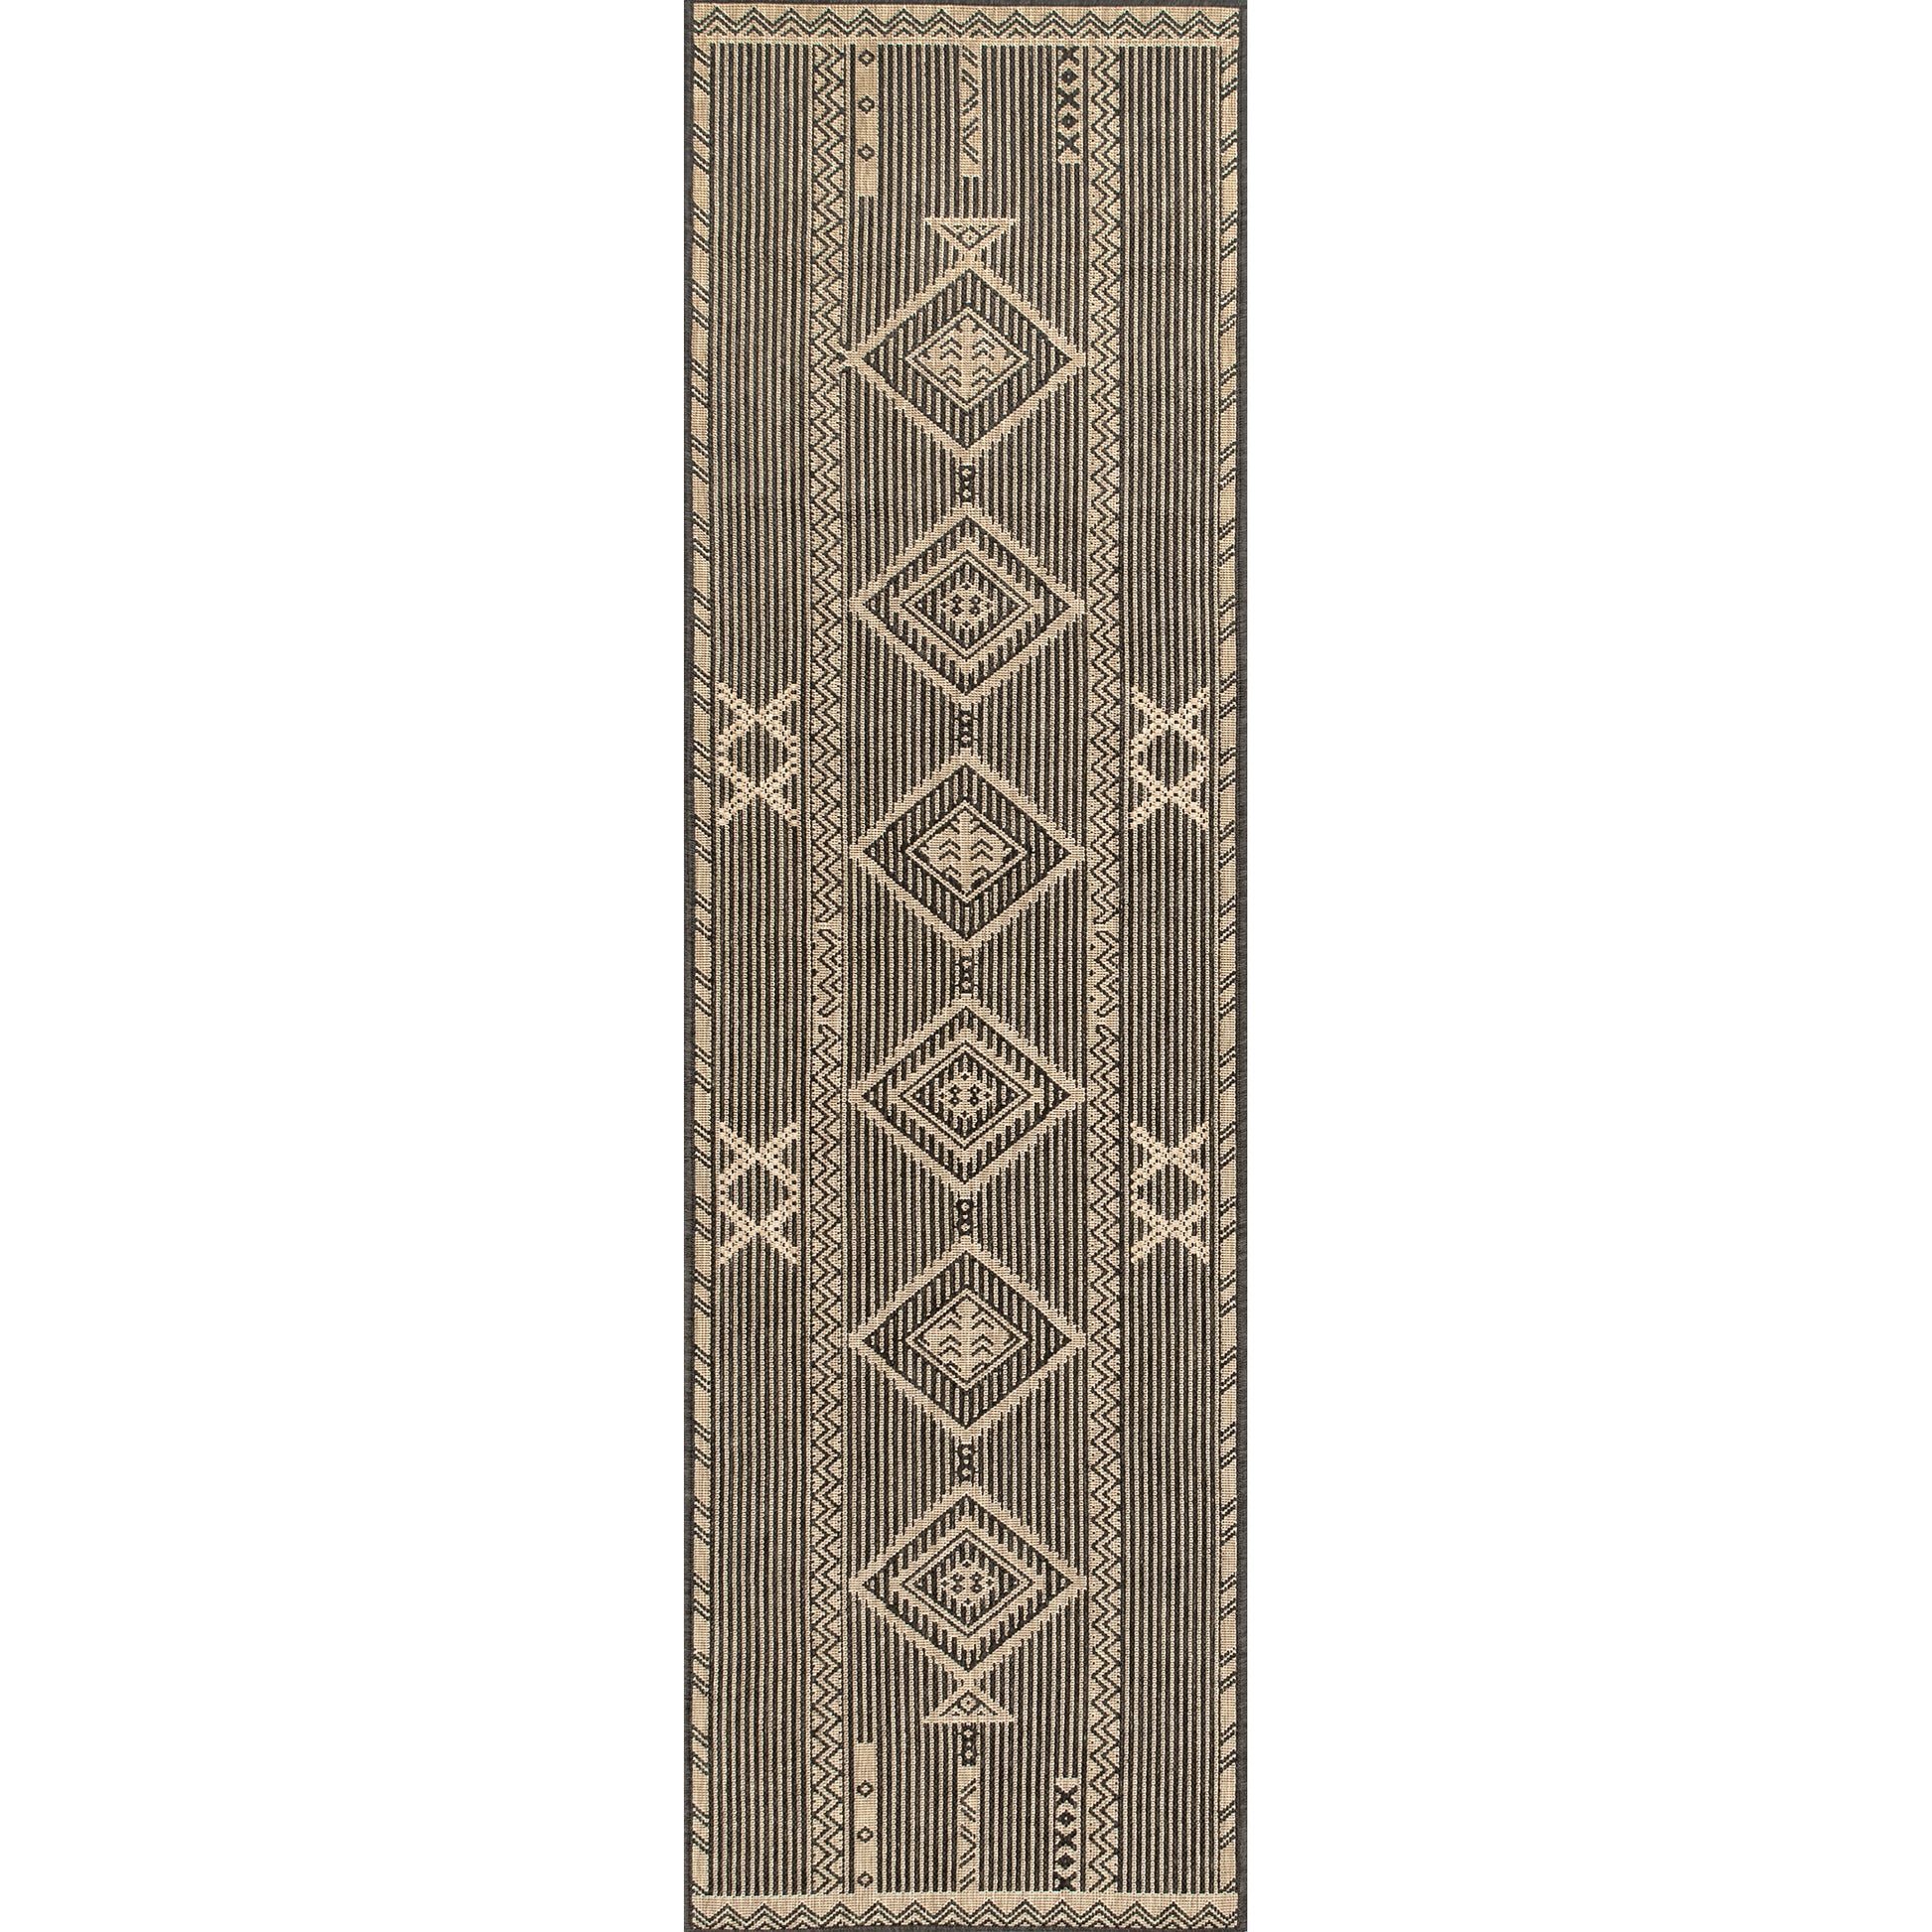 Nuloom Aria Tribal Transitional Nar1809C Charcoal Area Rug